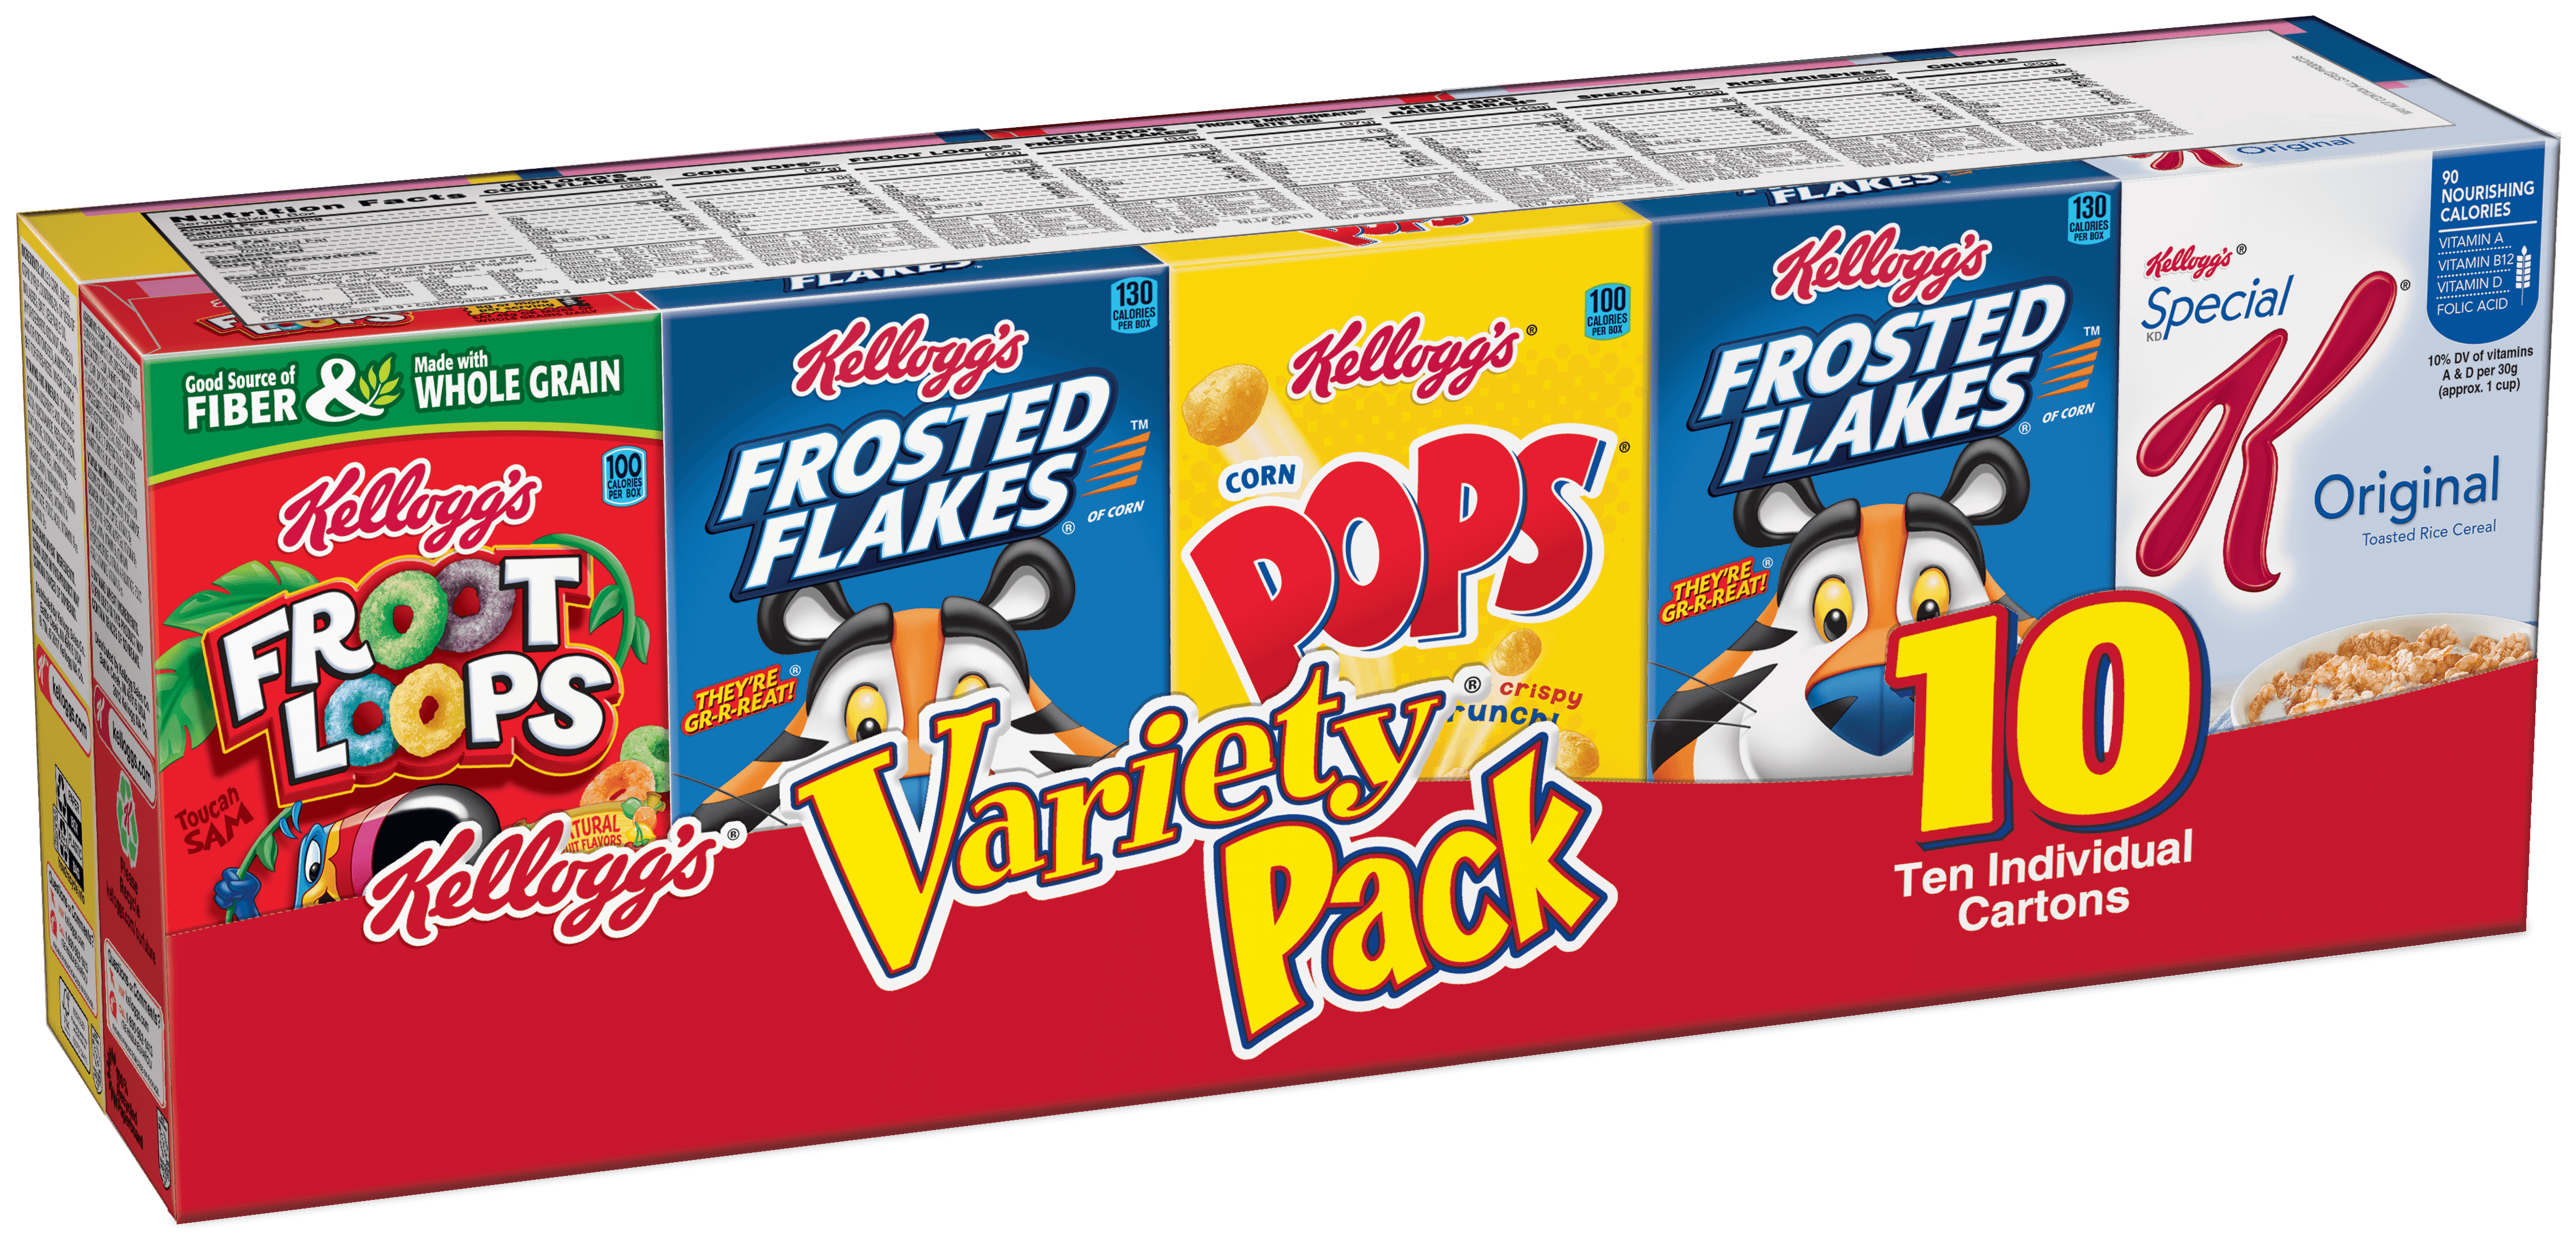 Kellogg's Assorted Cereal Variety Pack, 10 count, 10.94 oz ...